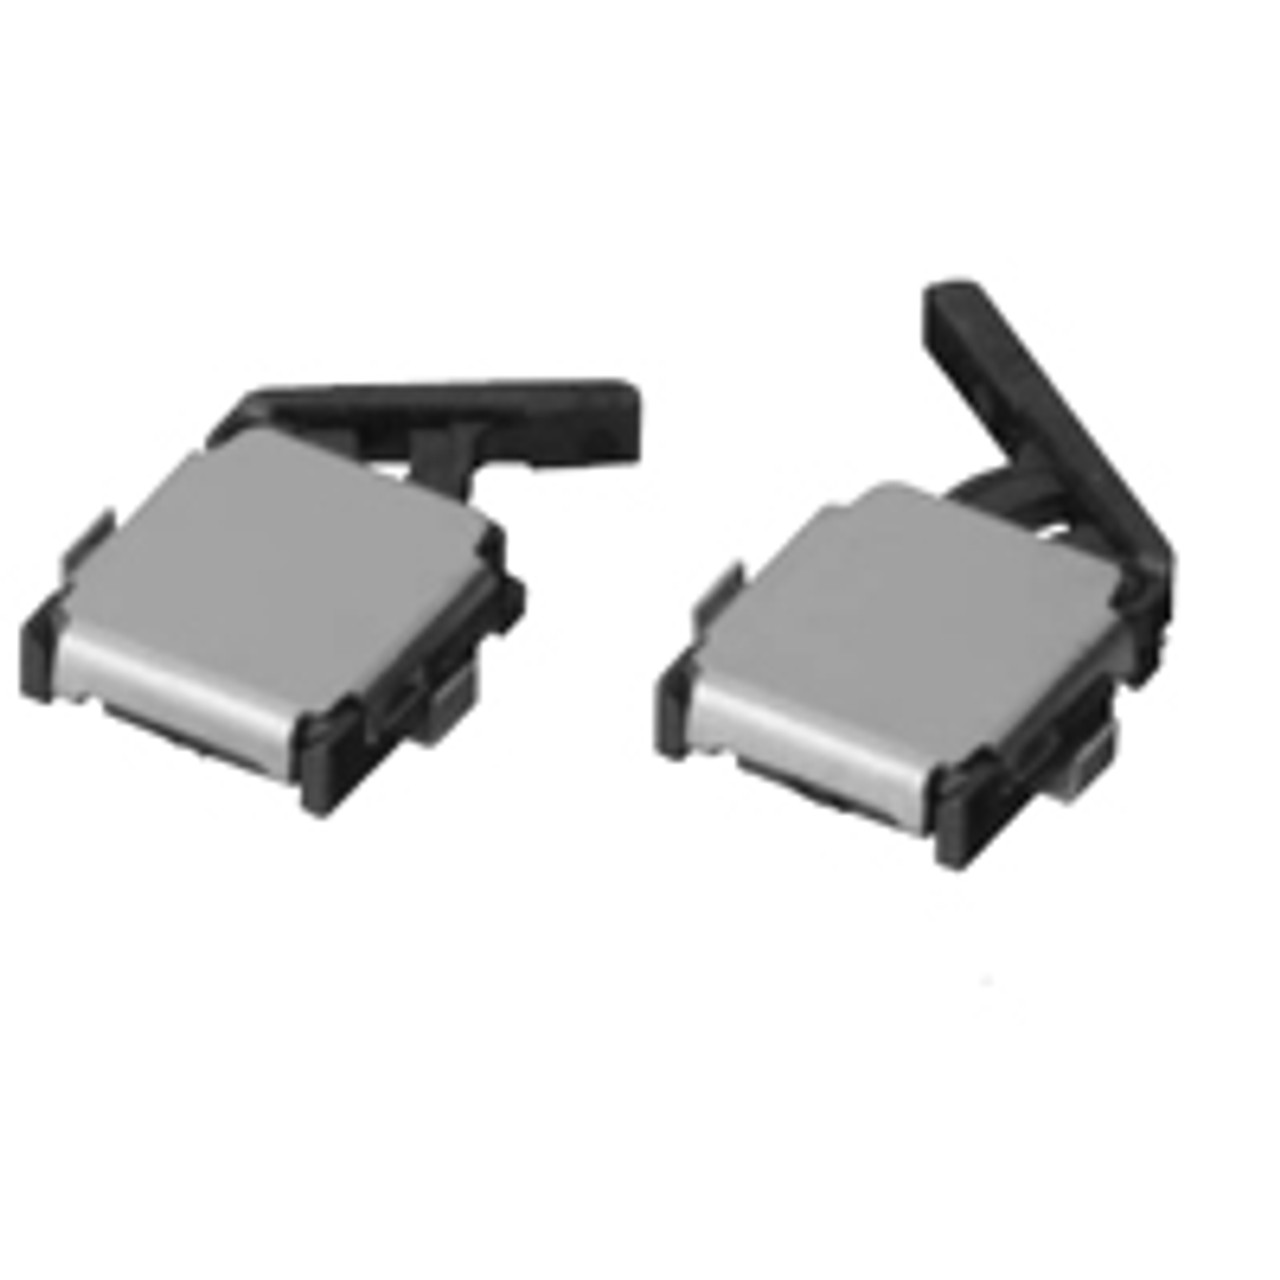 Omron D3SH-B0L Snap-Action Switches